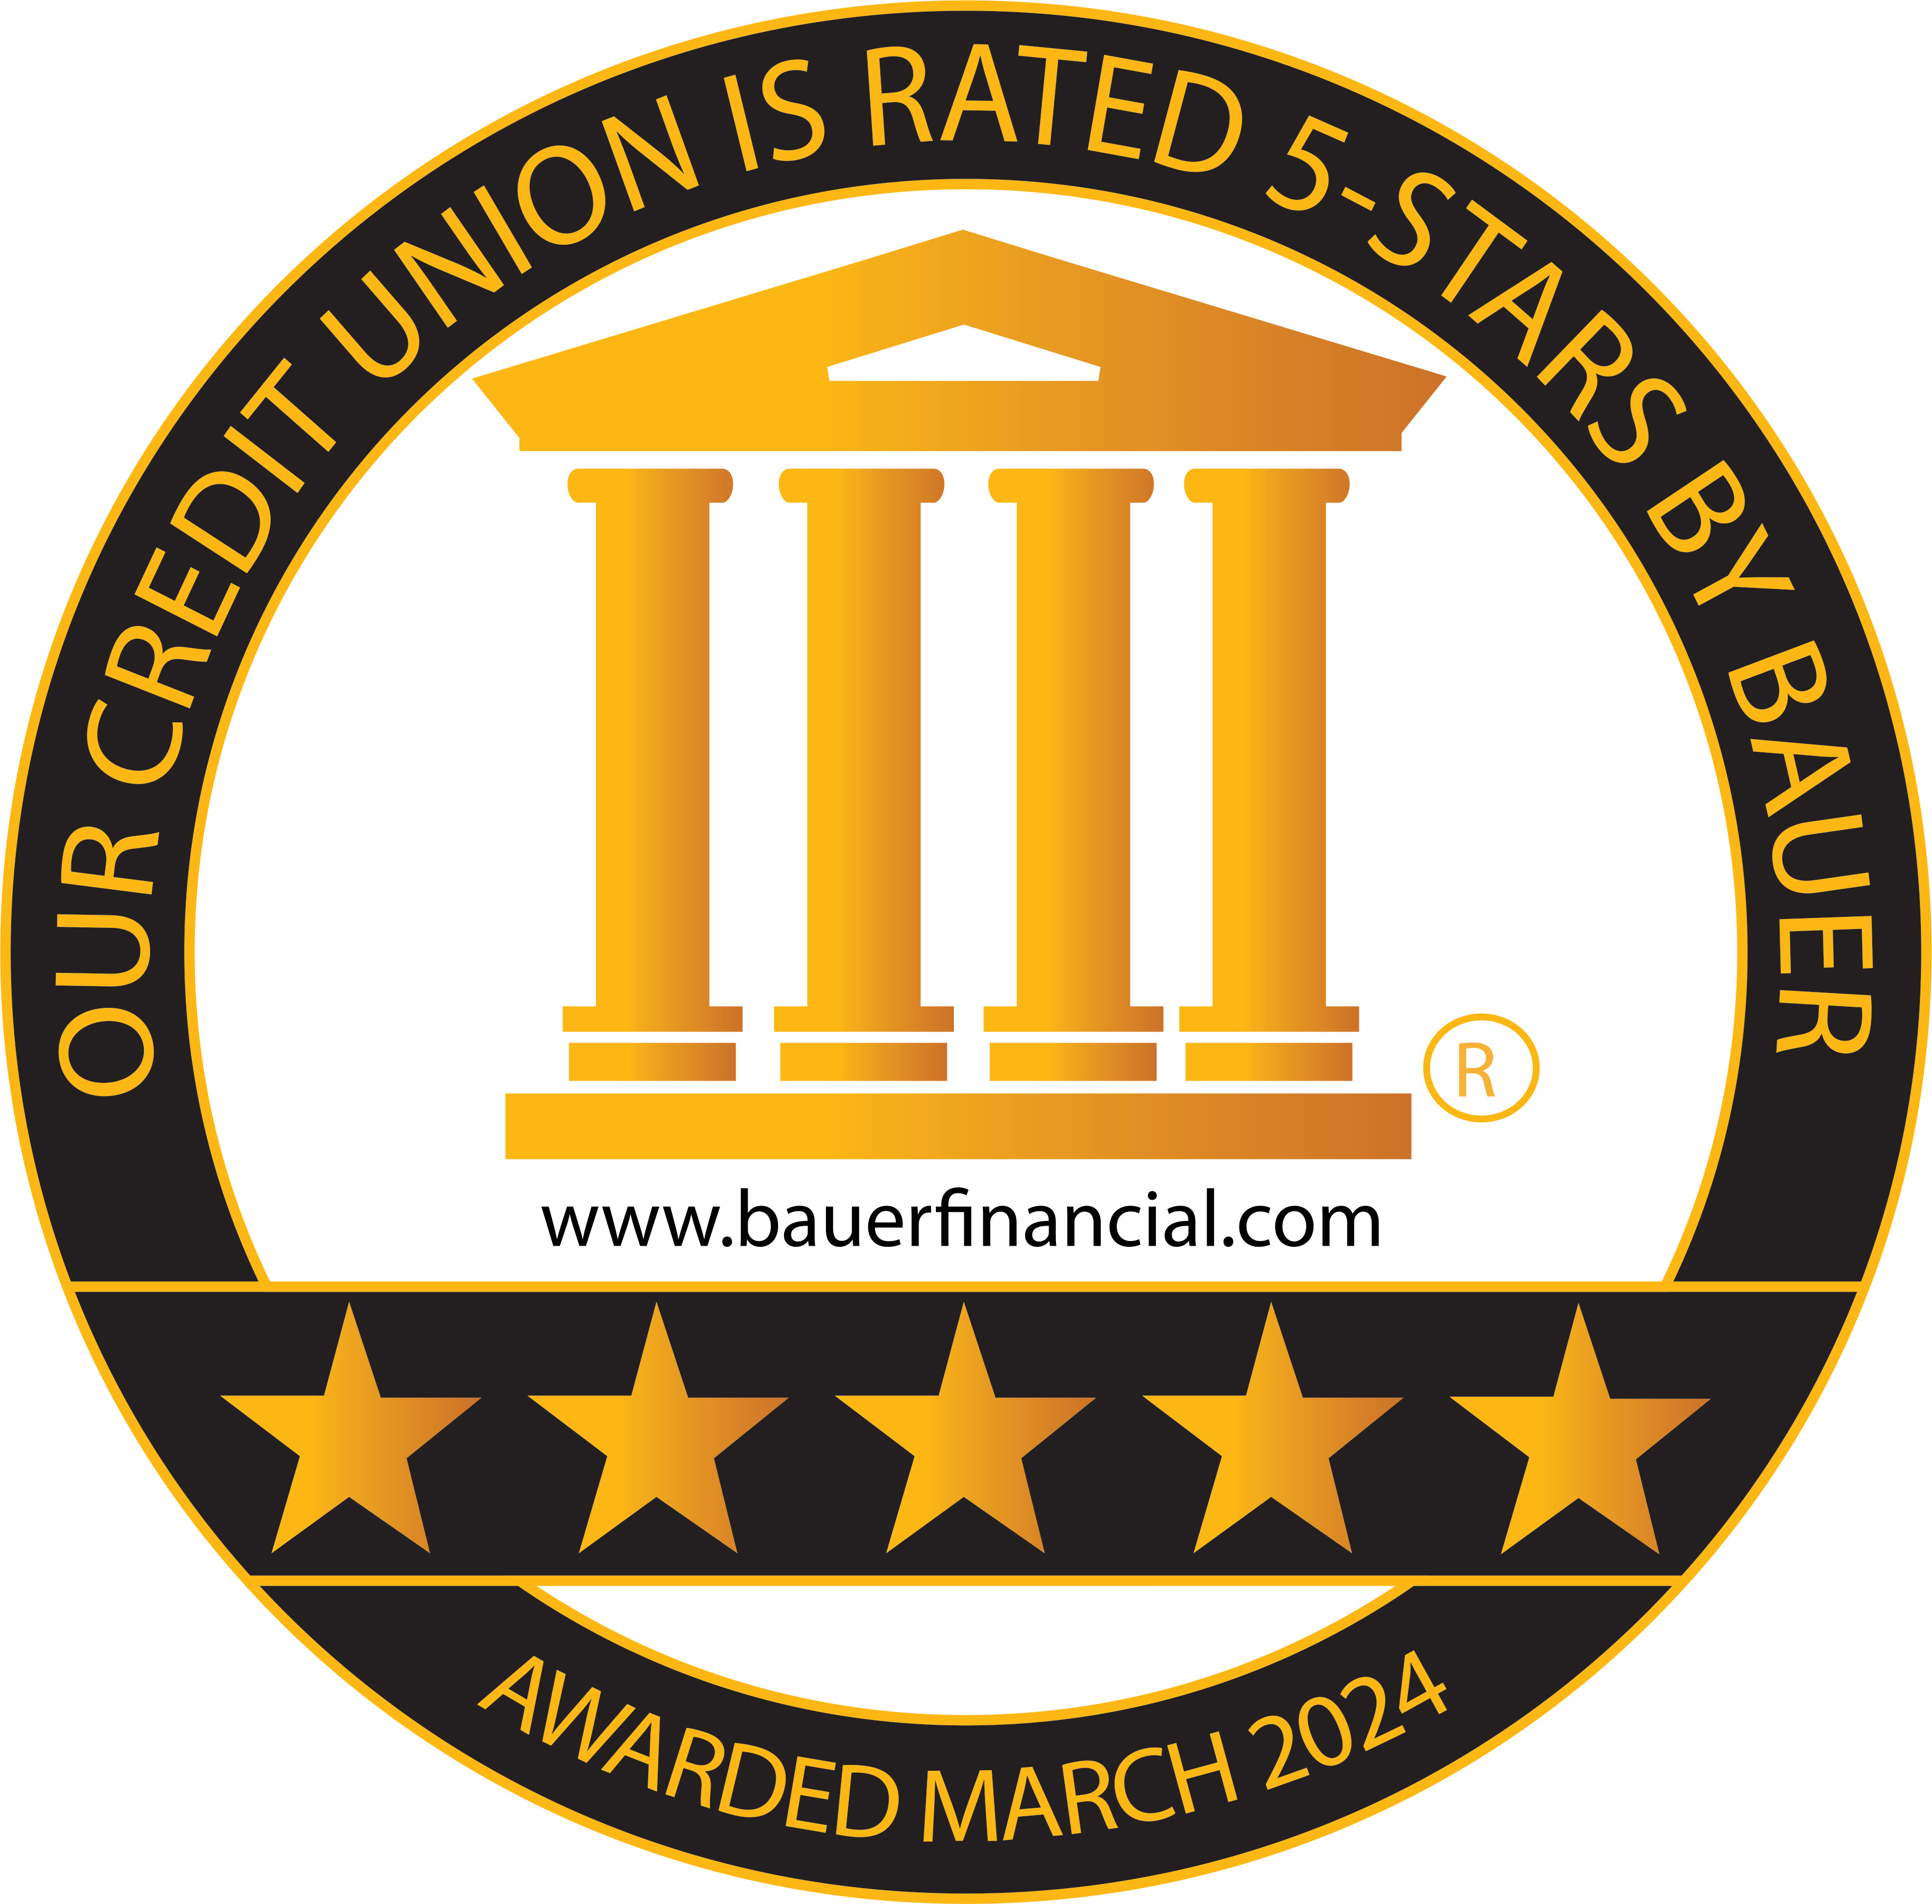 Bauer Financial 5 star rating awarded March 2024